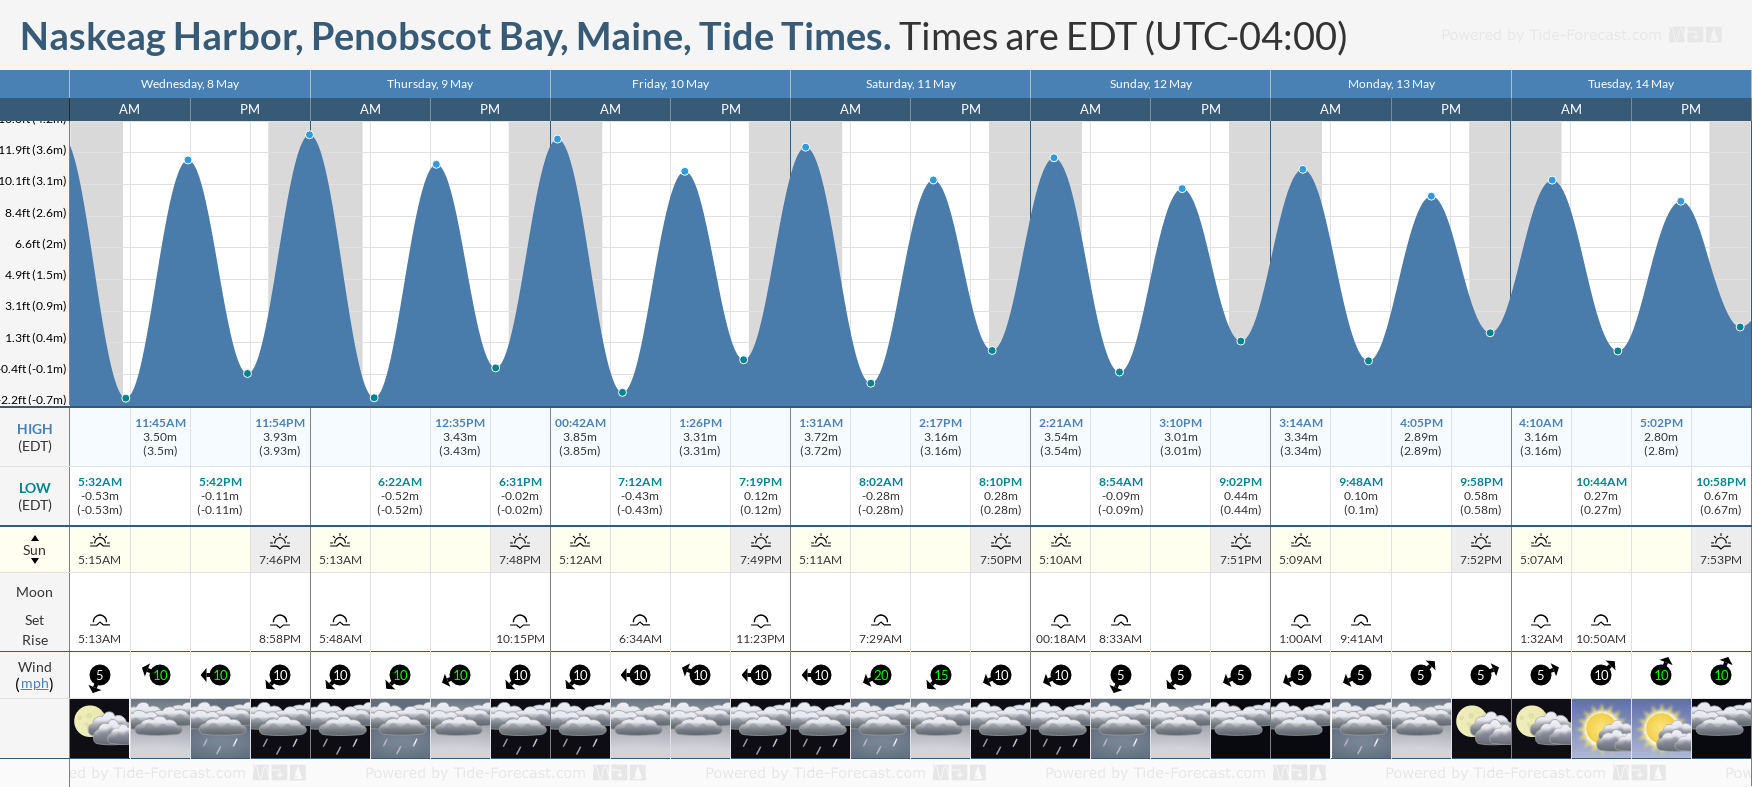 Naskeag Harbor, Penobscot Bay, Maine Tide Chart including high and low tide tide times for the next 7 days